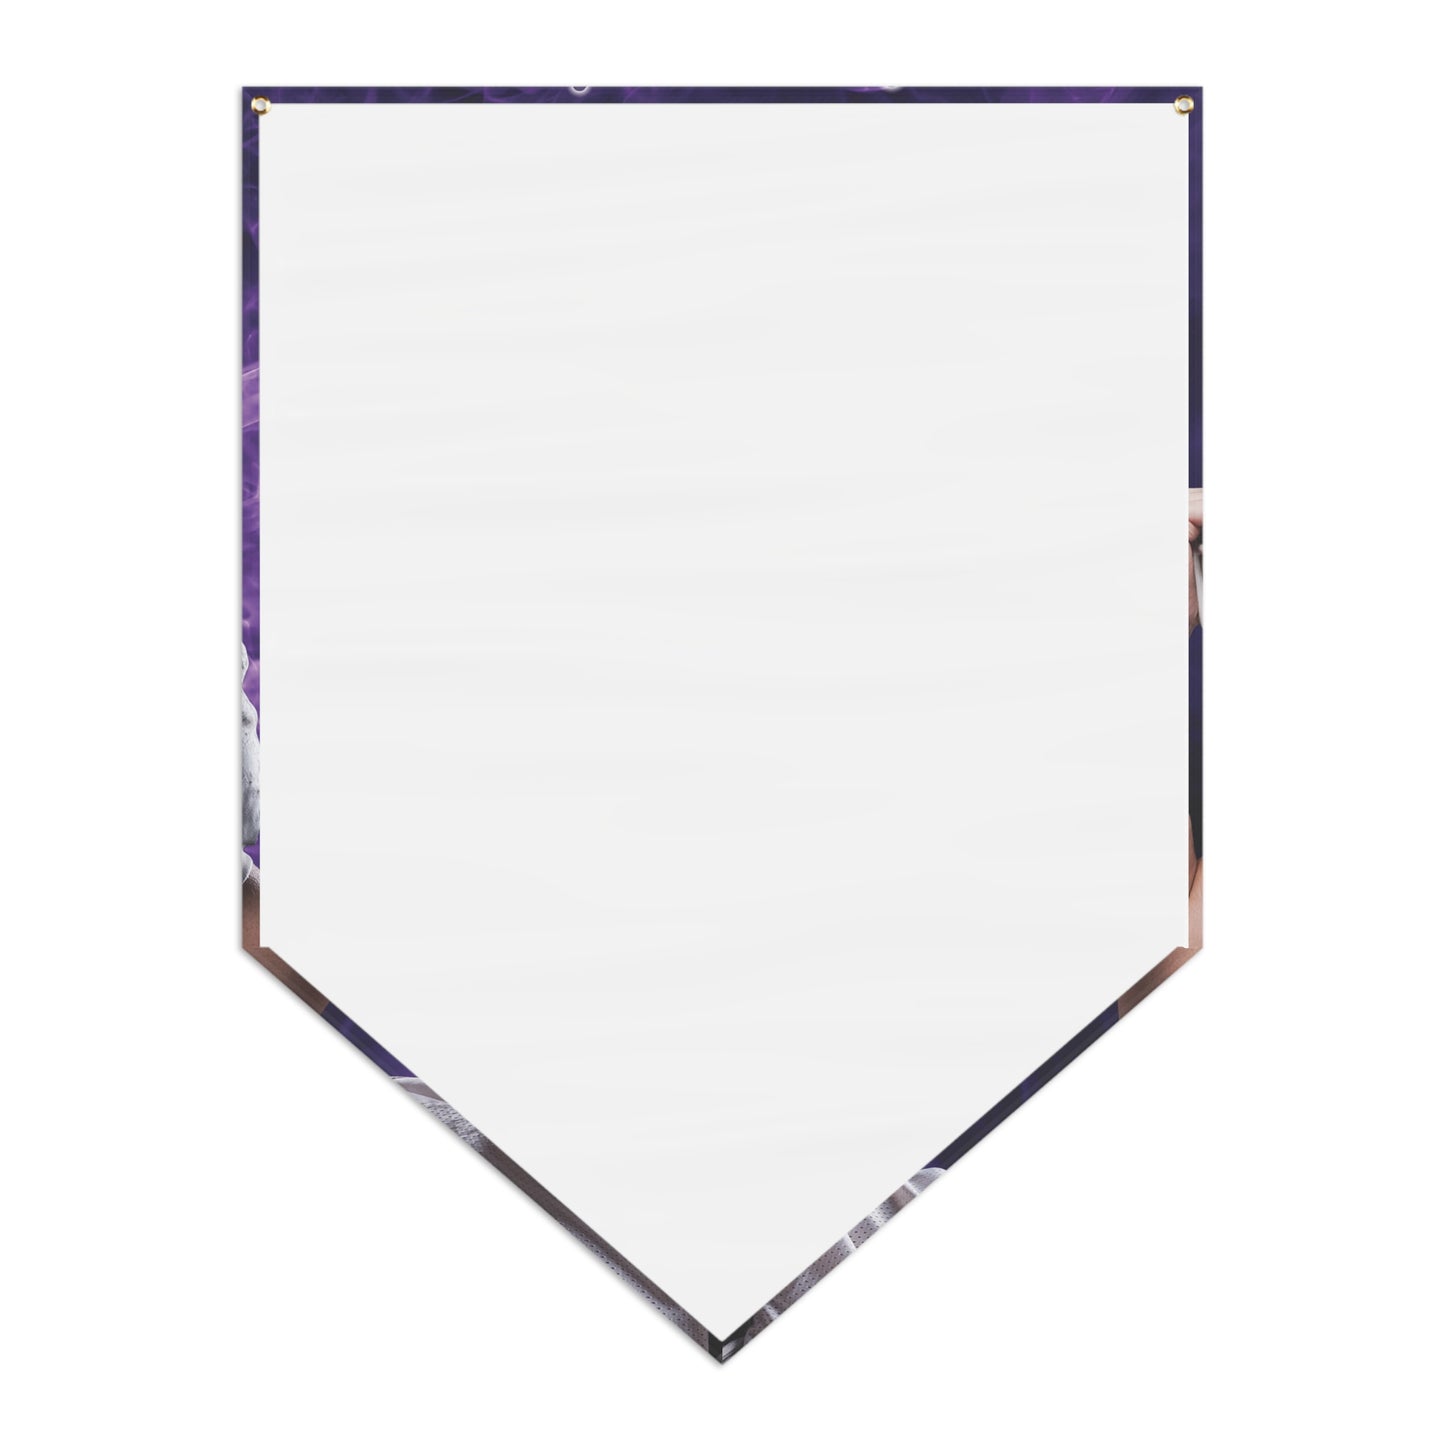 STUDENT Pennant Banner - PERSONALIZE!